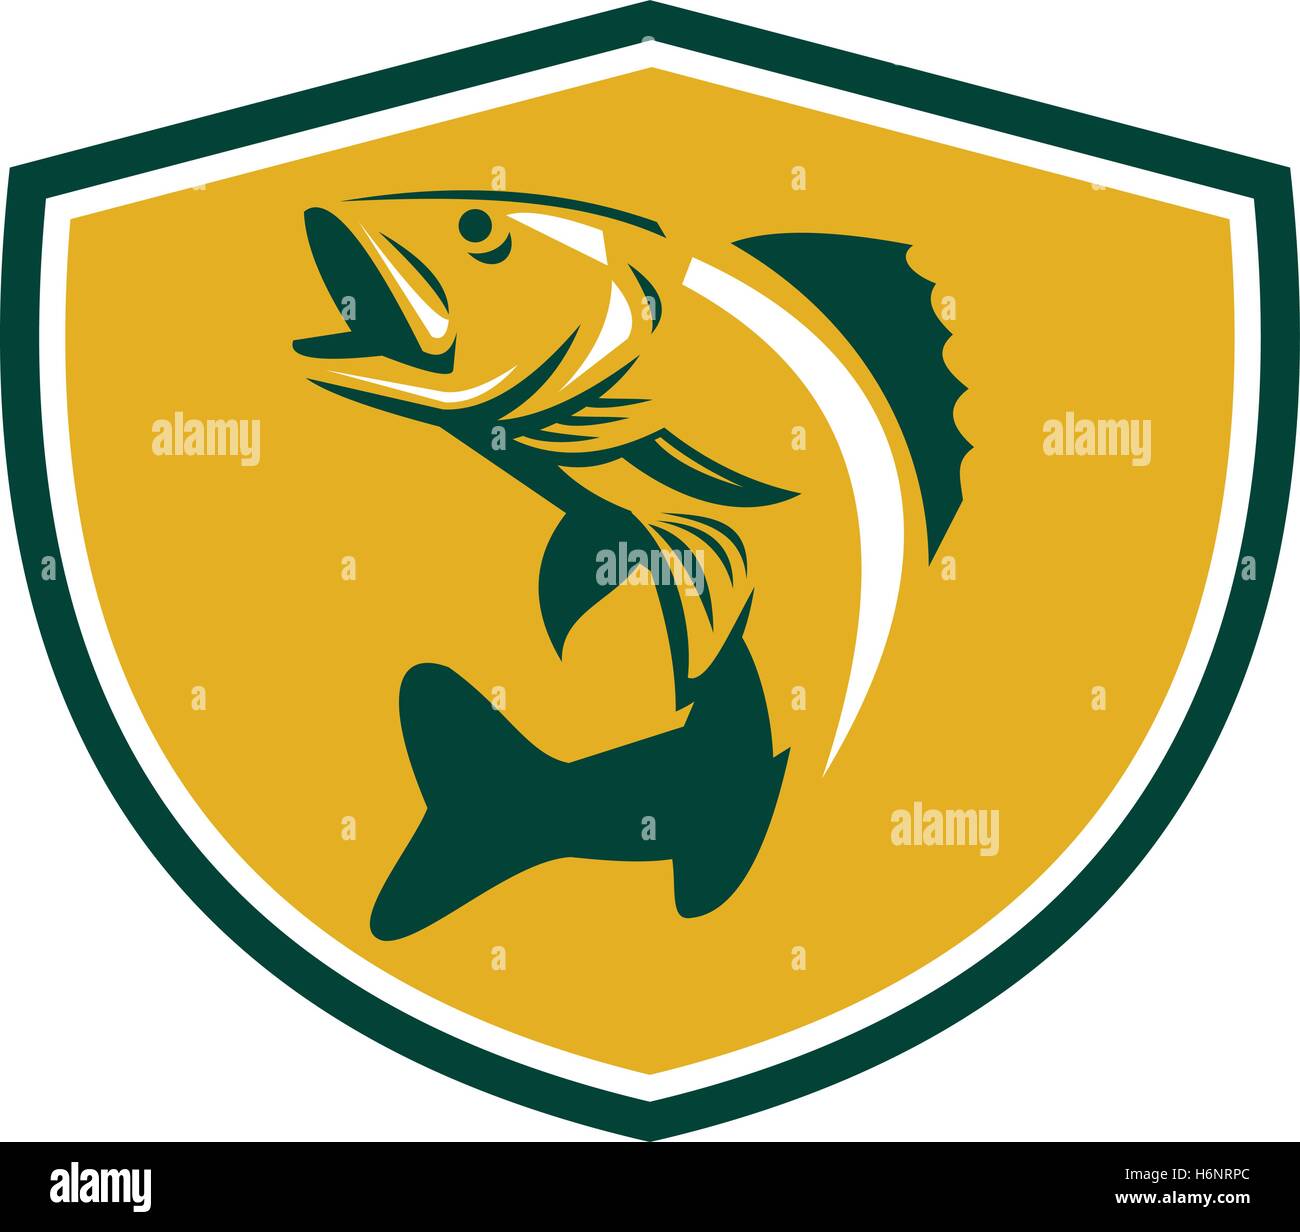 Illustration of a Walleye (Sander vitreus, formerly Stizostedion vitreum), a freshwater perciform fish jumping up viewed from the side set inside shield crest on isolated background done in retro style. Stock Vector